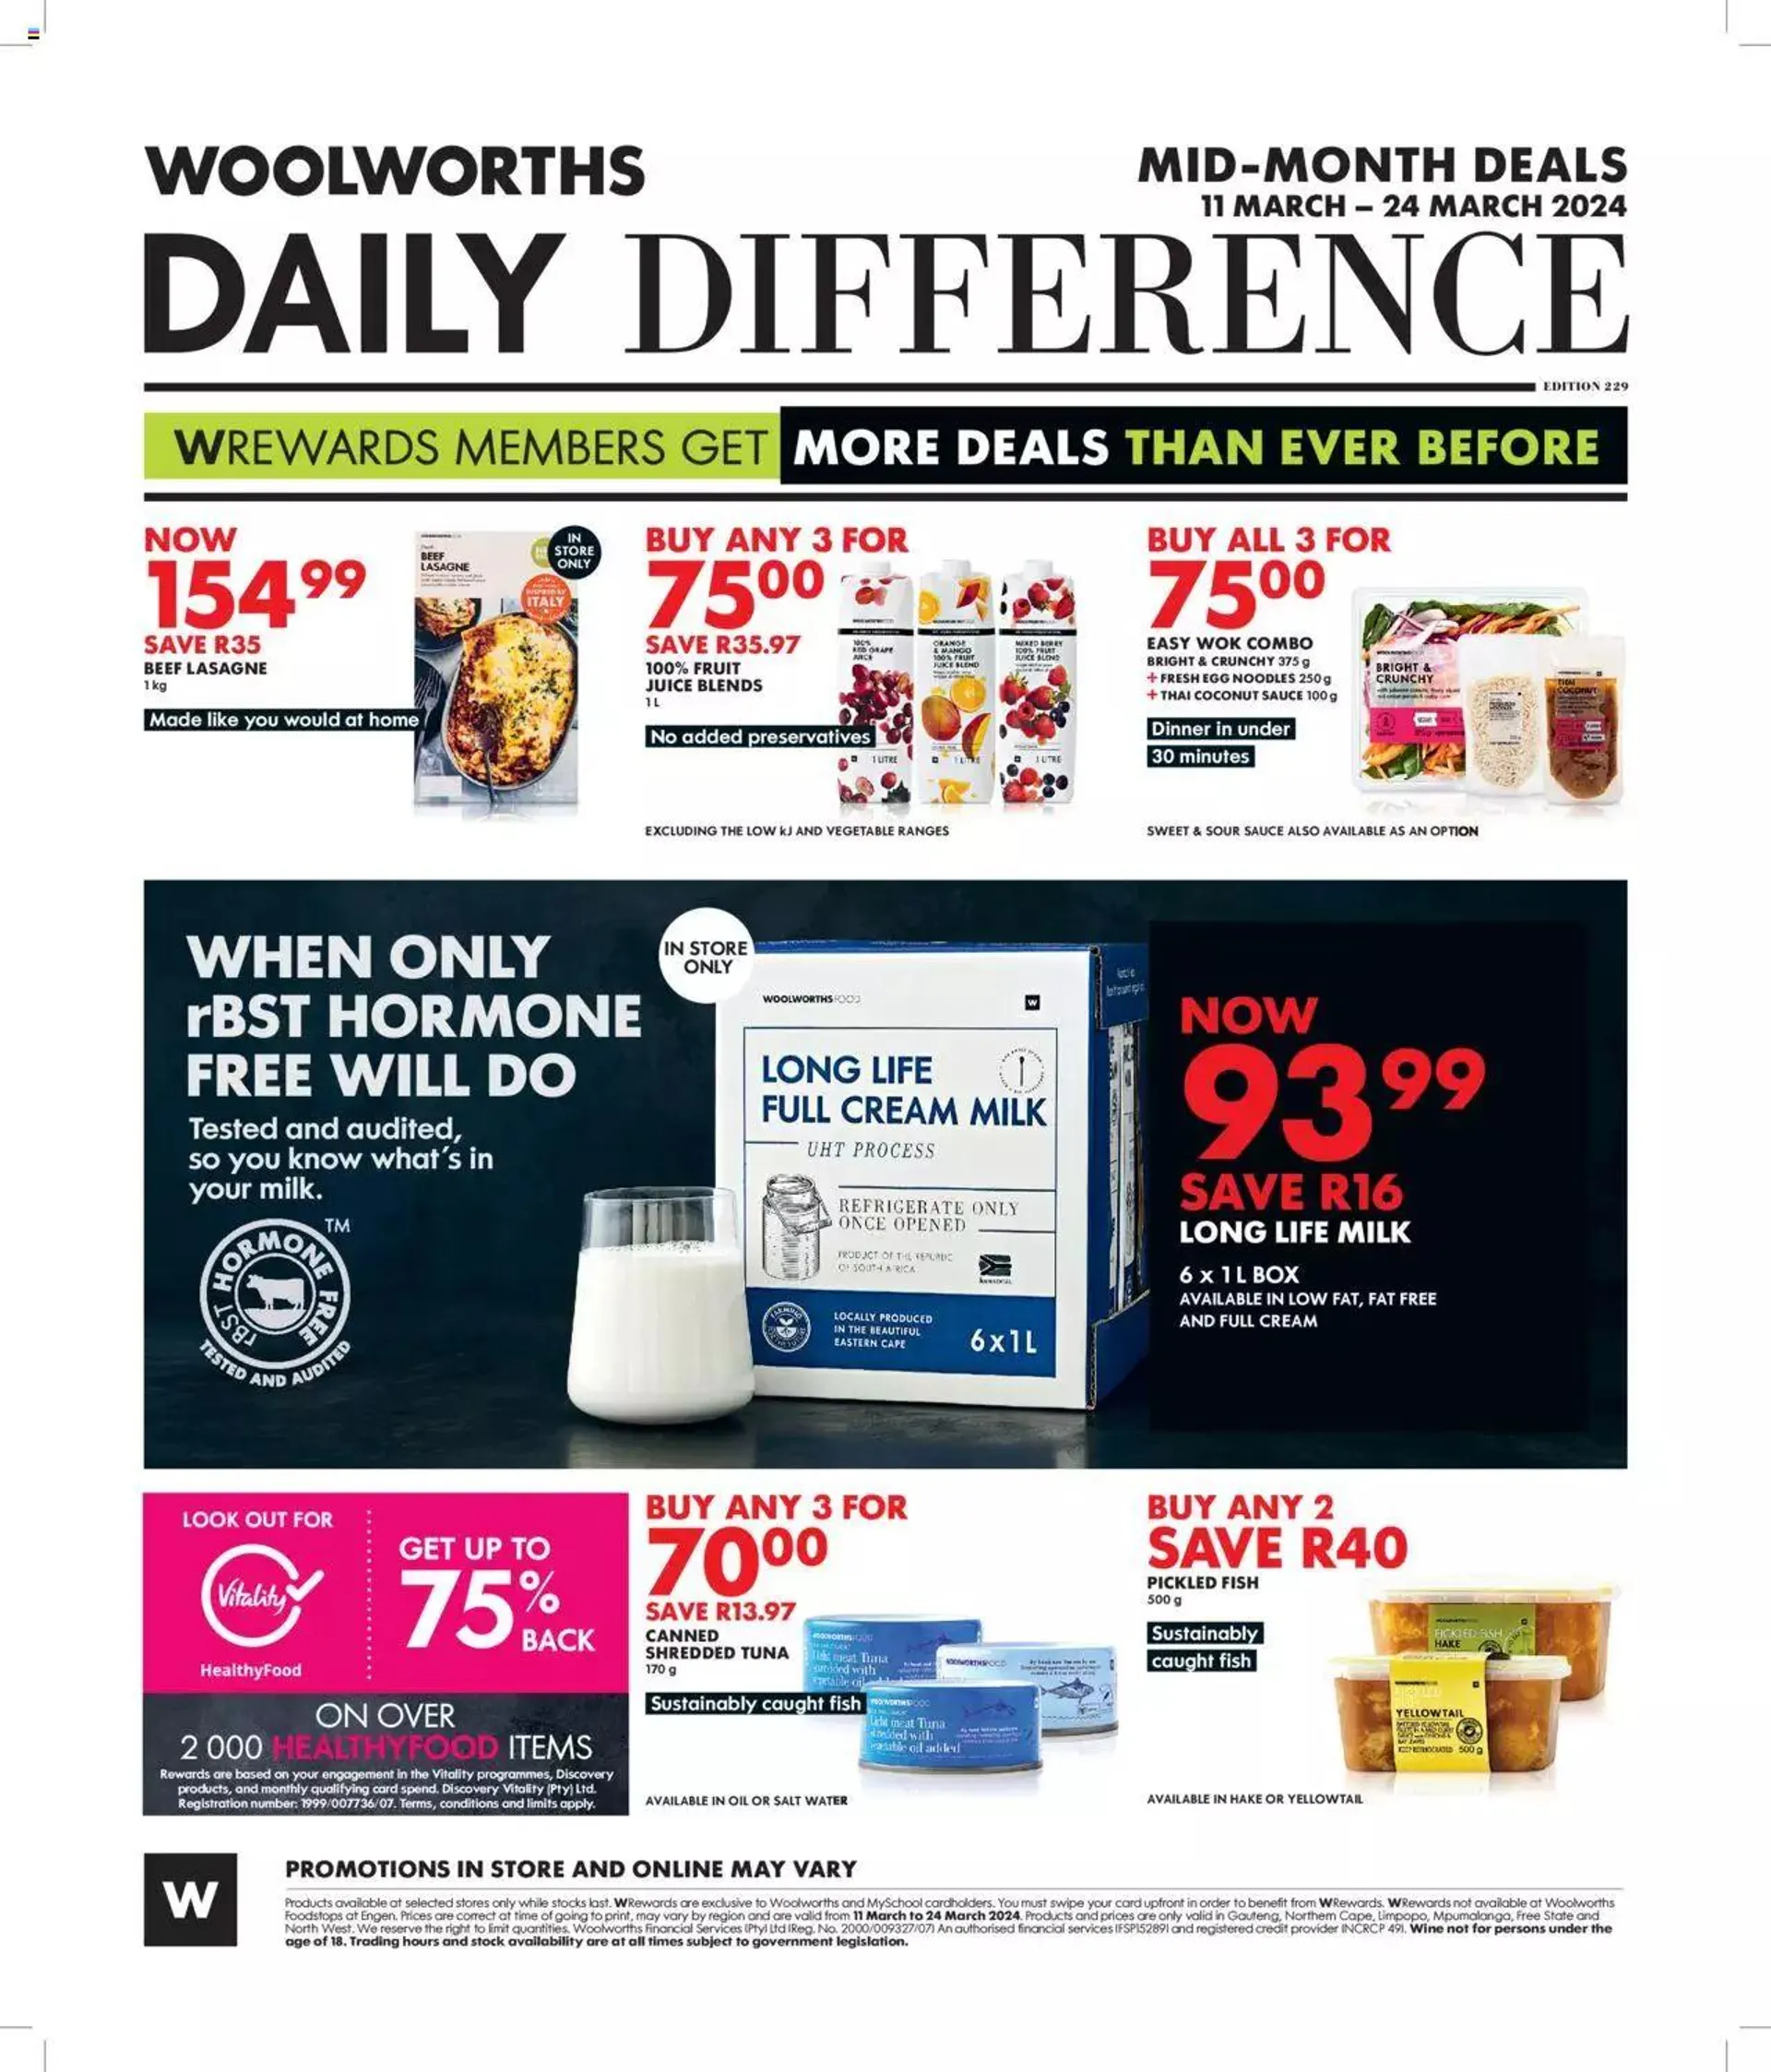 Woolworths Daily Difference - Gauteng - 11 March 24 March 2024 - Page 8